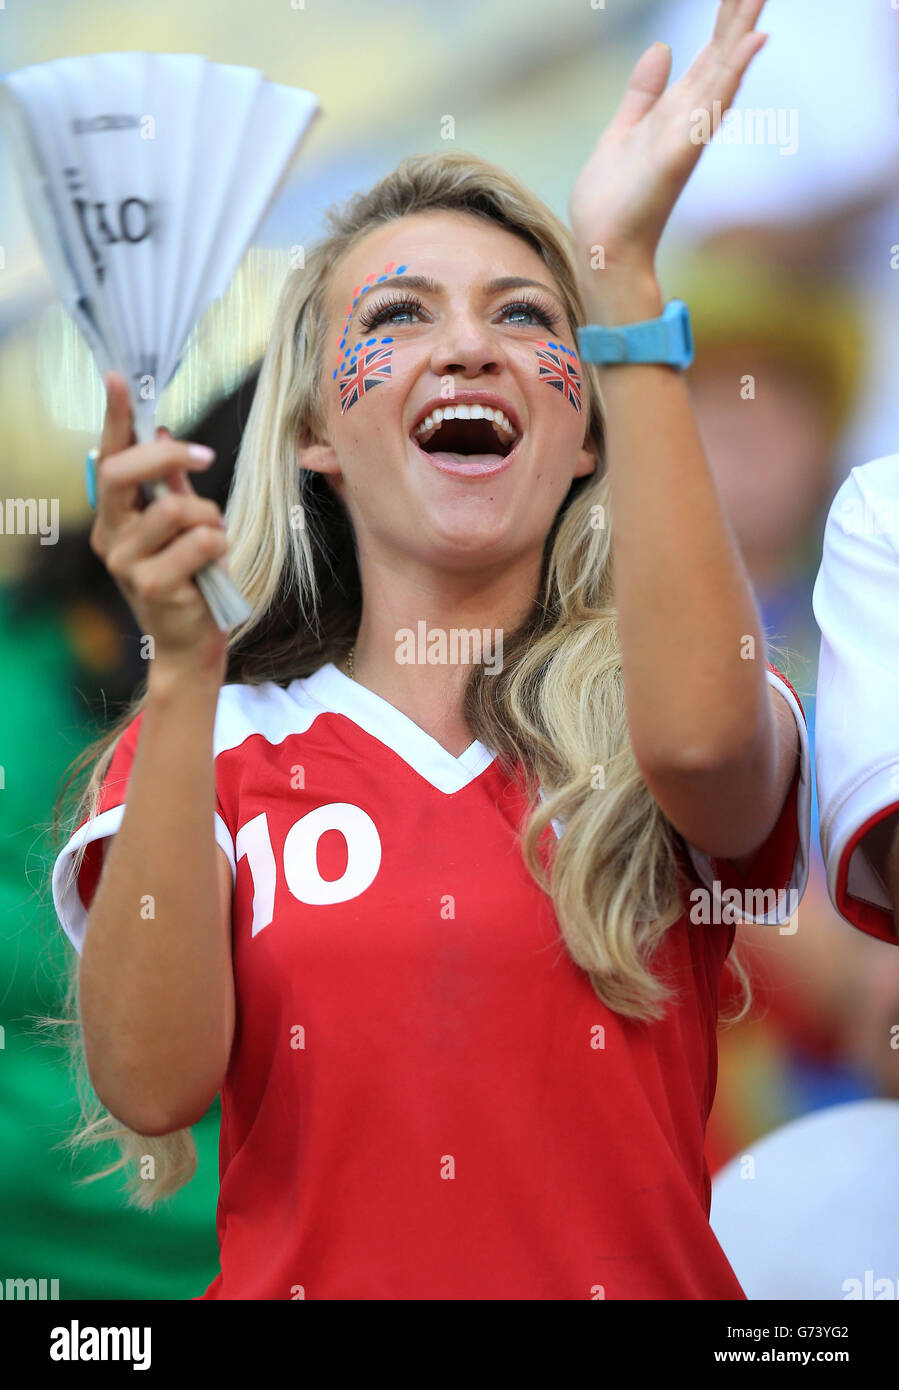 An England fan shows support for her team before kick-off in the FIFA World Cup, Group D match at the Arena da Amazonia, Manaus, Brazil. Stock Photo